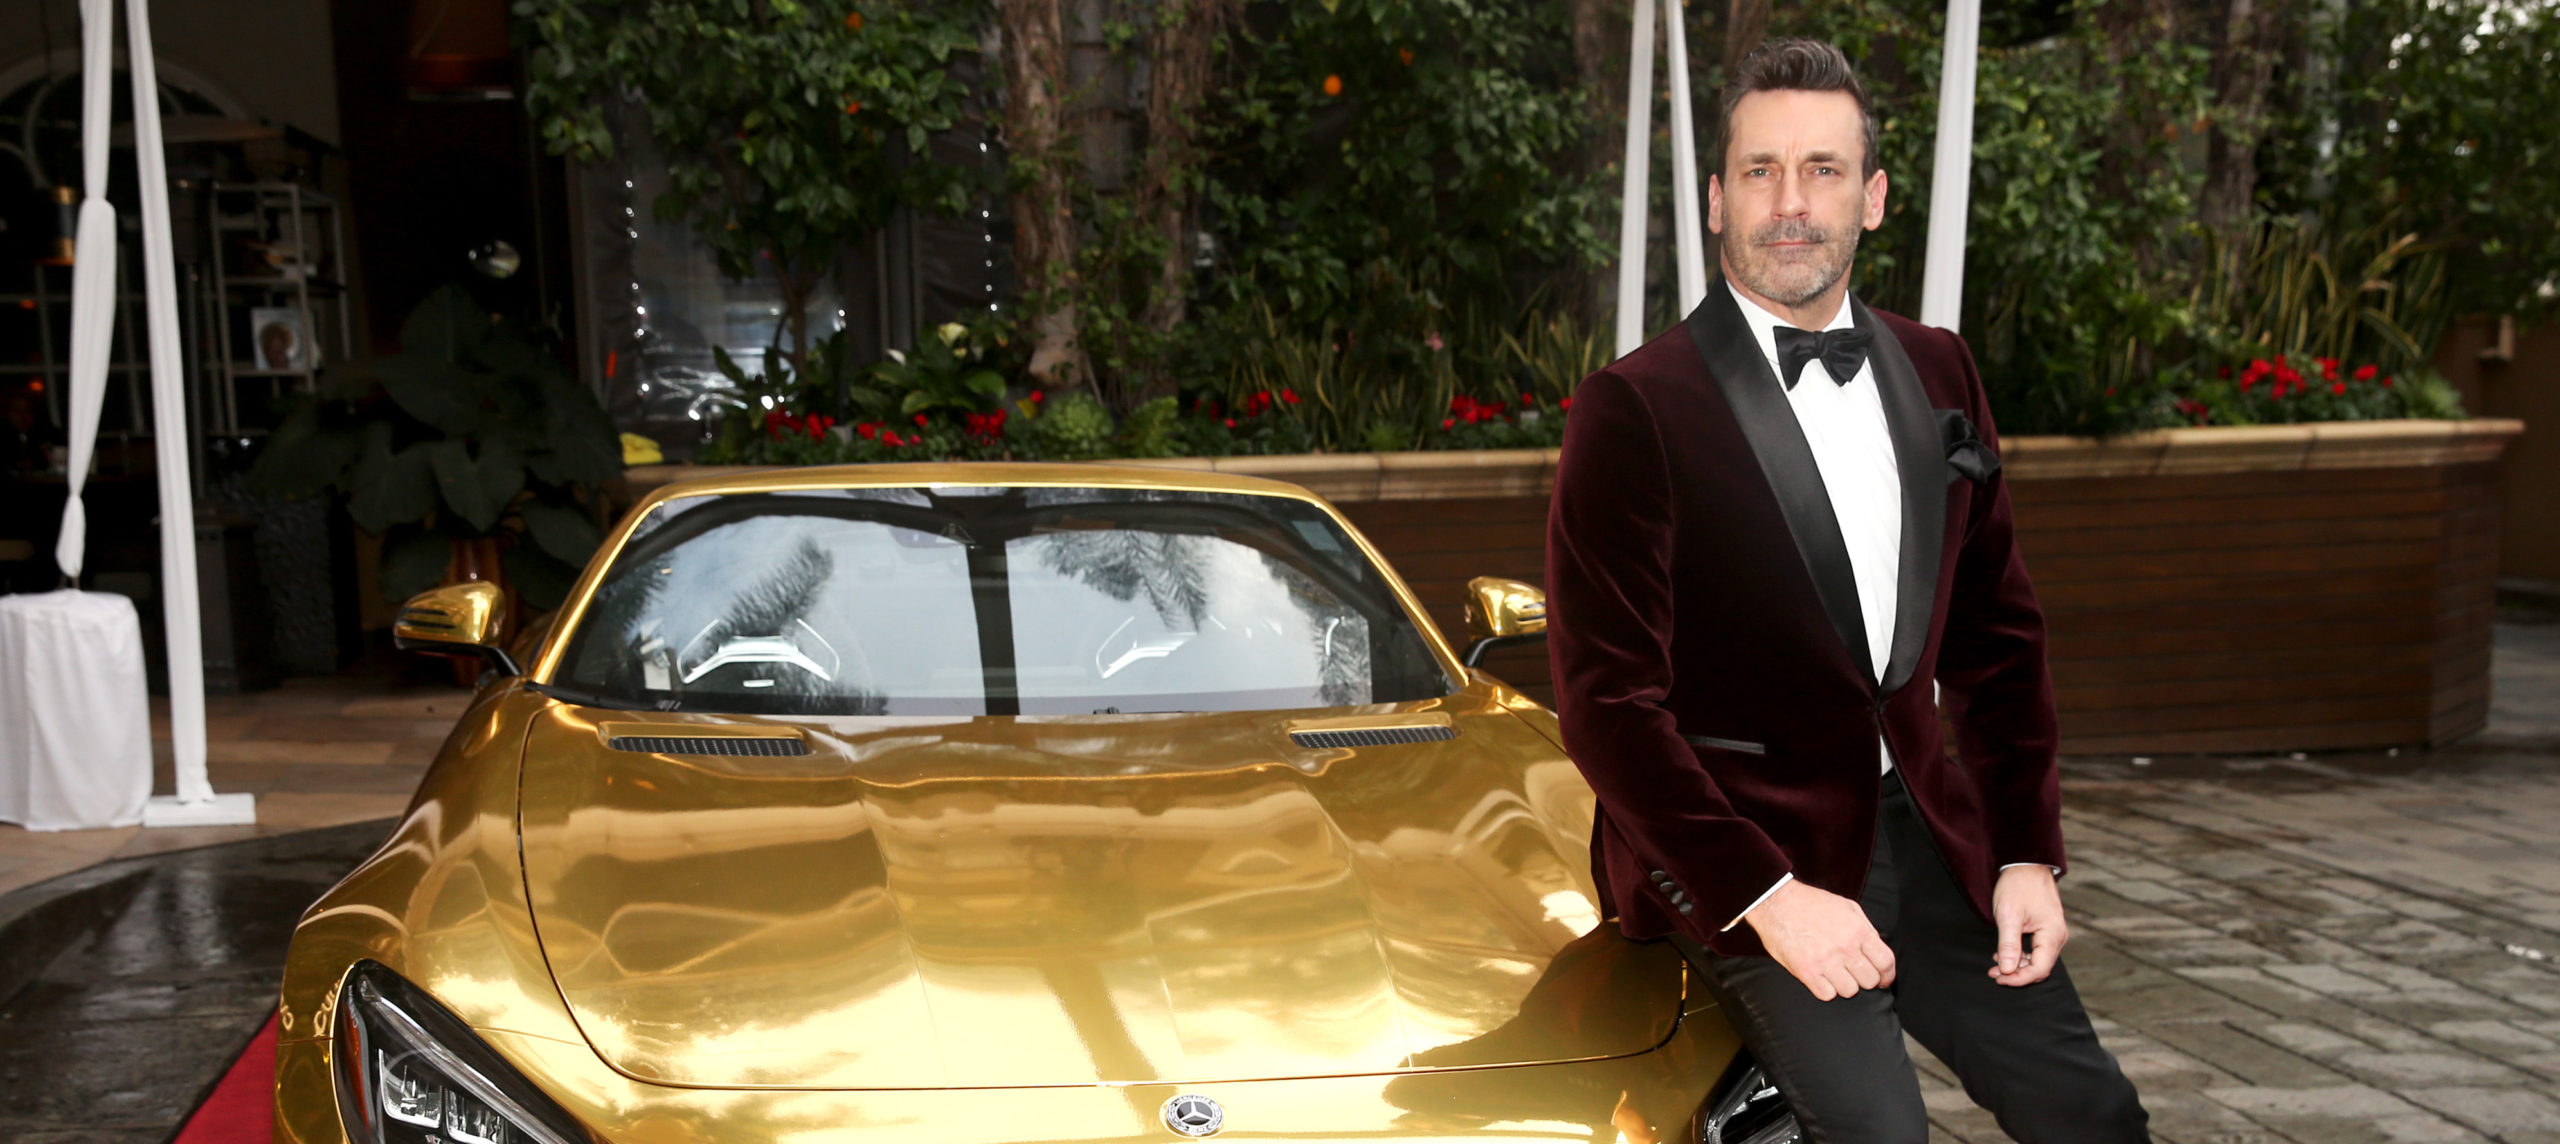 Actor Jon Hamm arrives at the 2020 Mercedes-Benz Viewing Party for the Oscars.